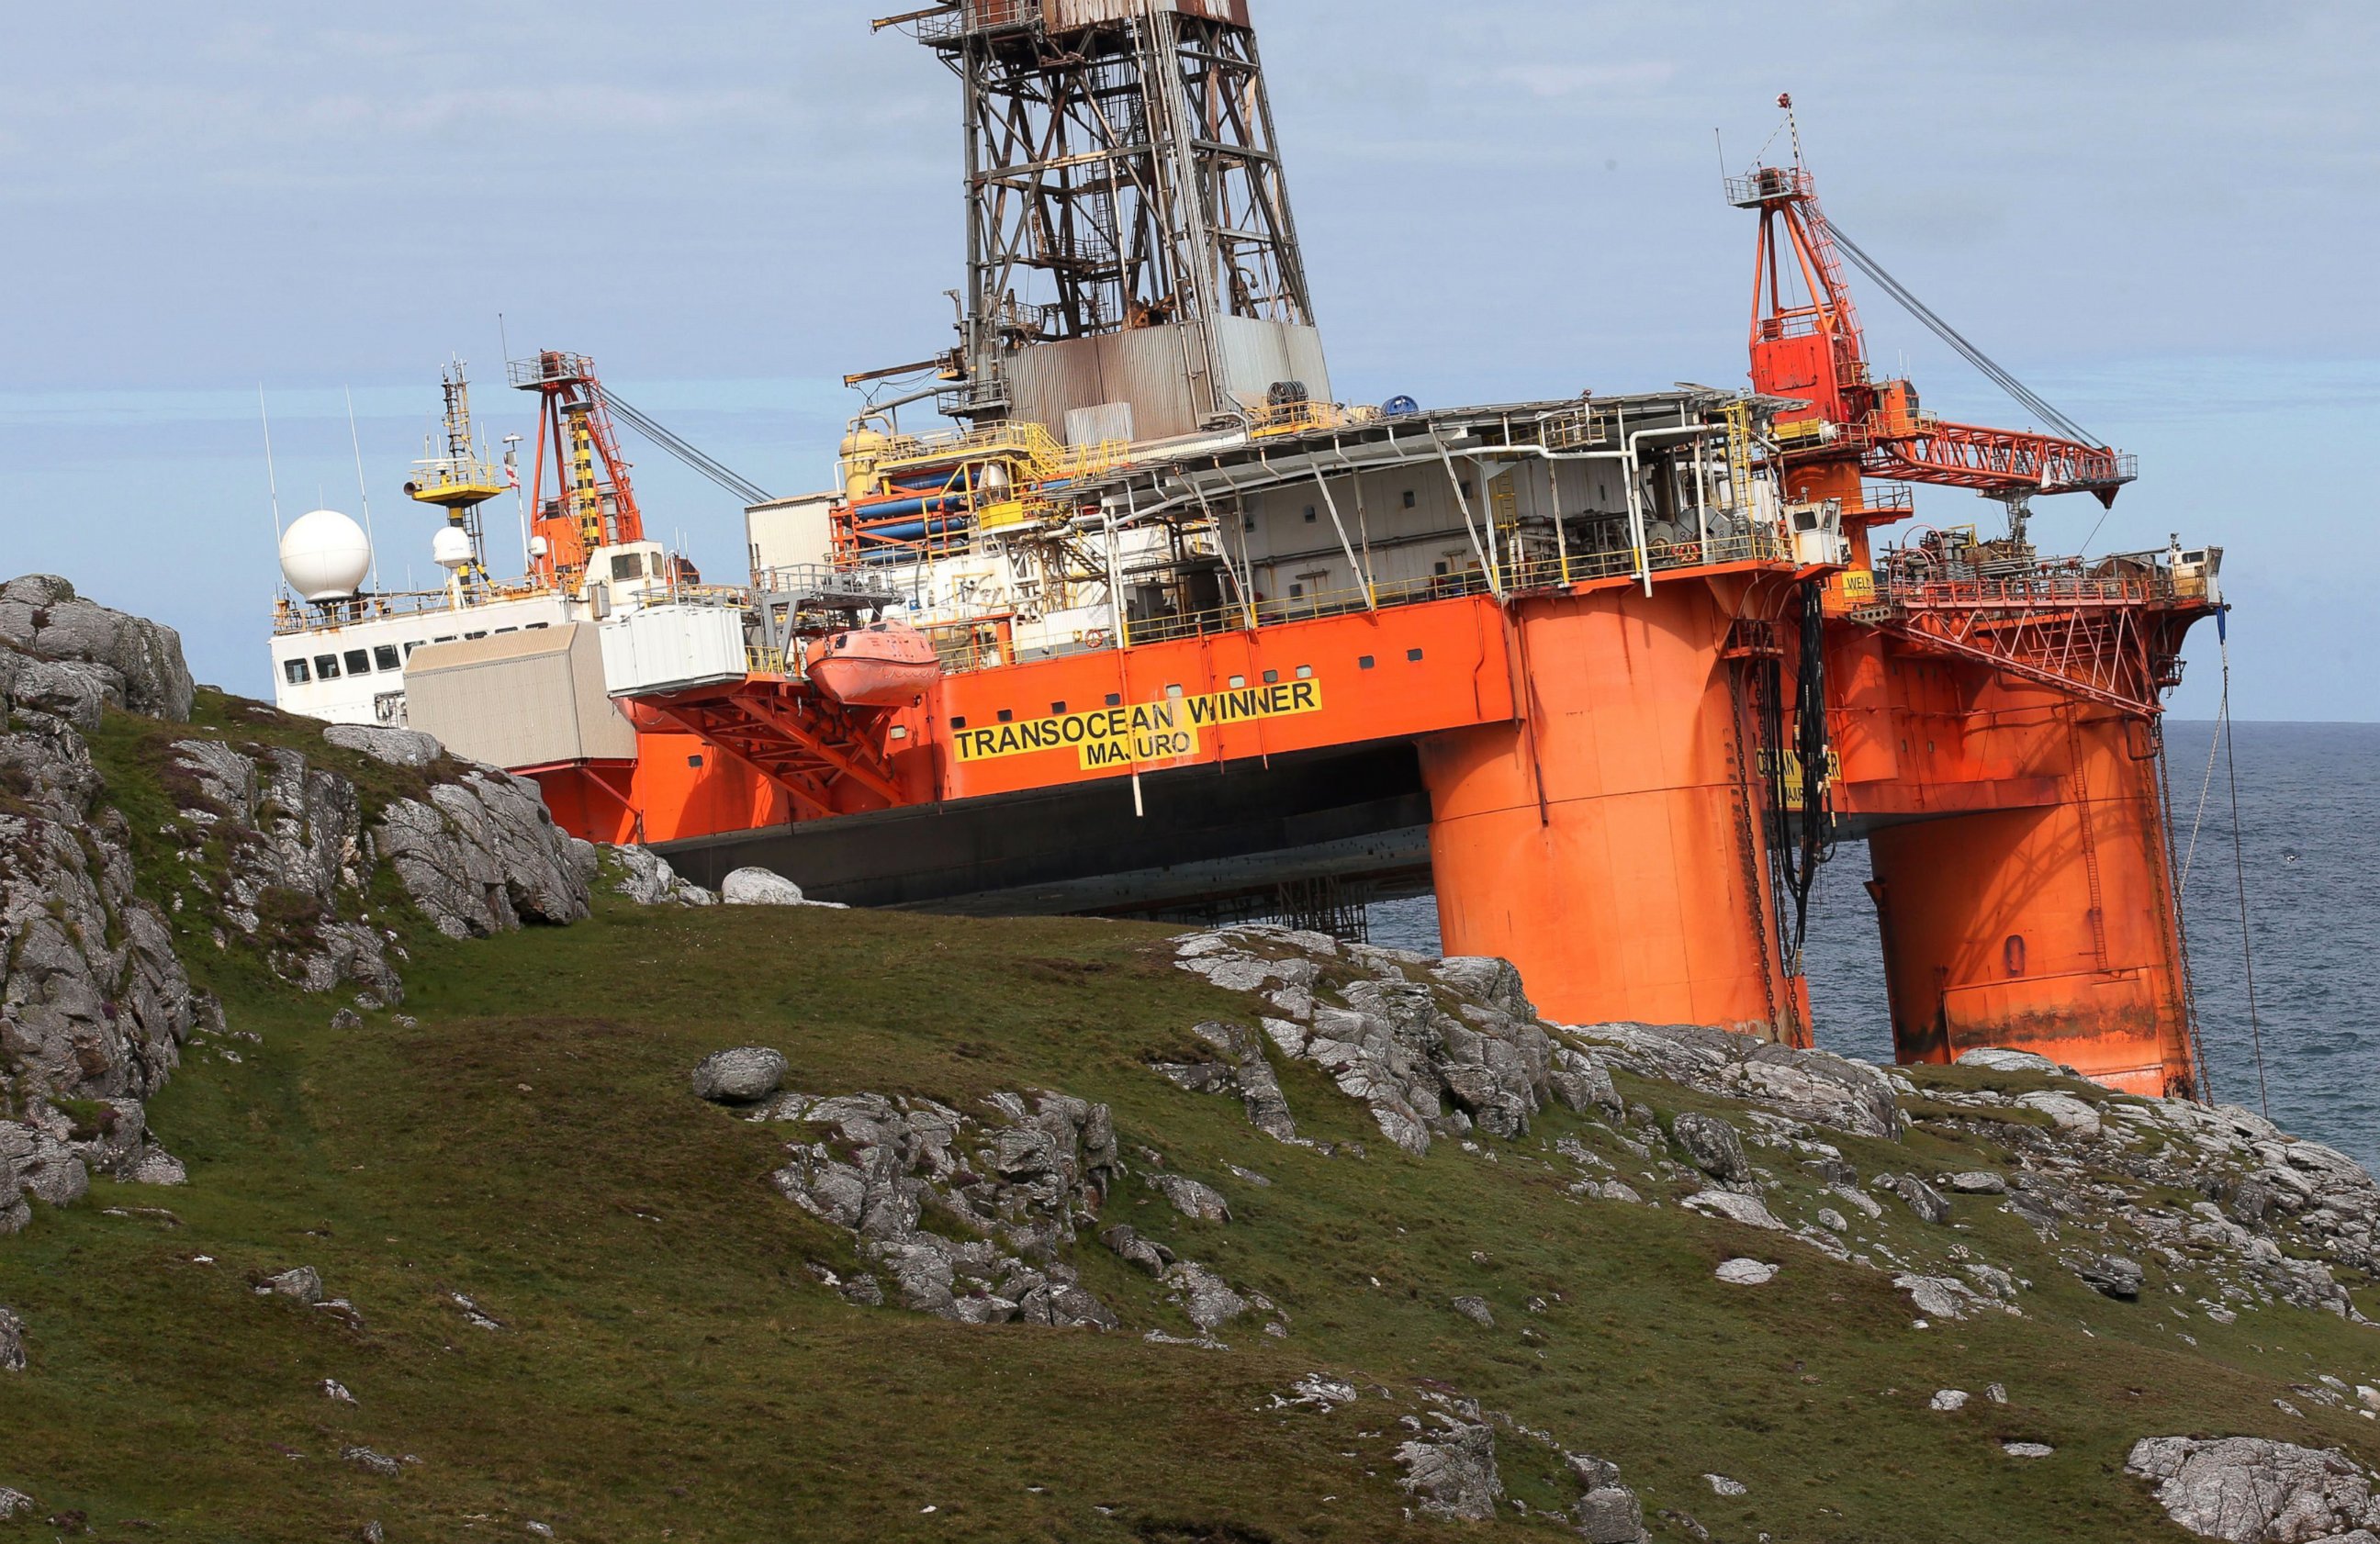 PHOTO: The Transocean Winner drilling rig stands proud from a spit of land off the coast of the Isle of Lewis, Scotland, after it ran aground in severe weather conditions, Aug. 9, 2016.